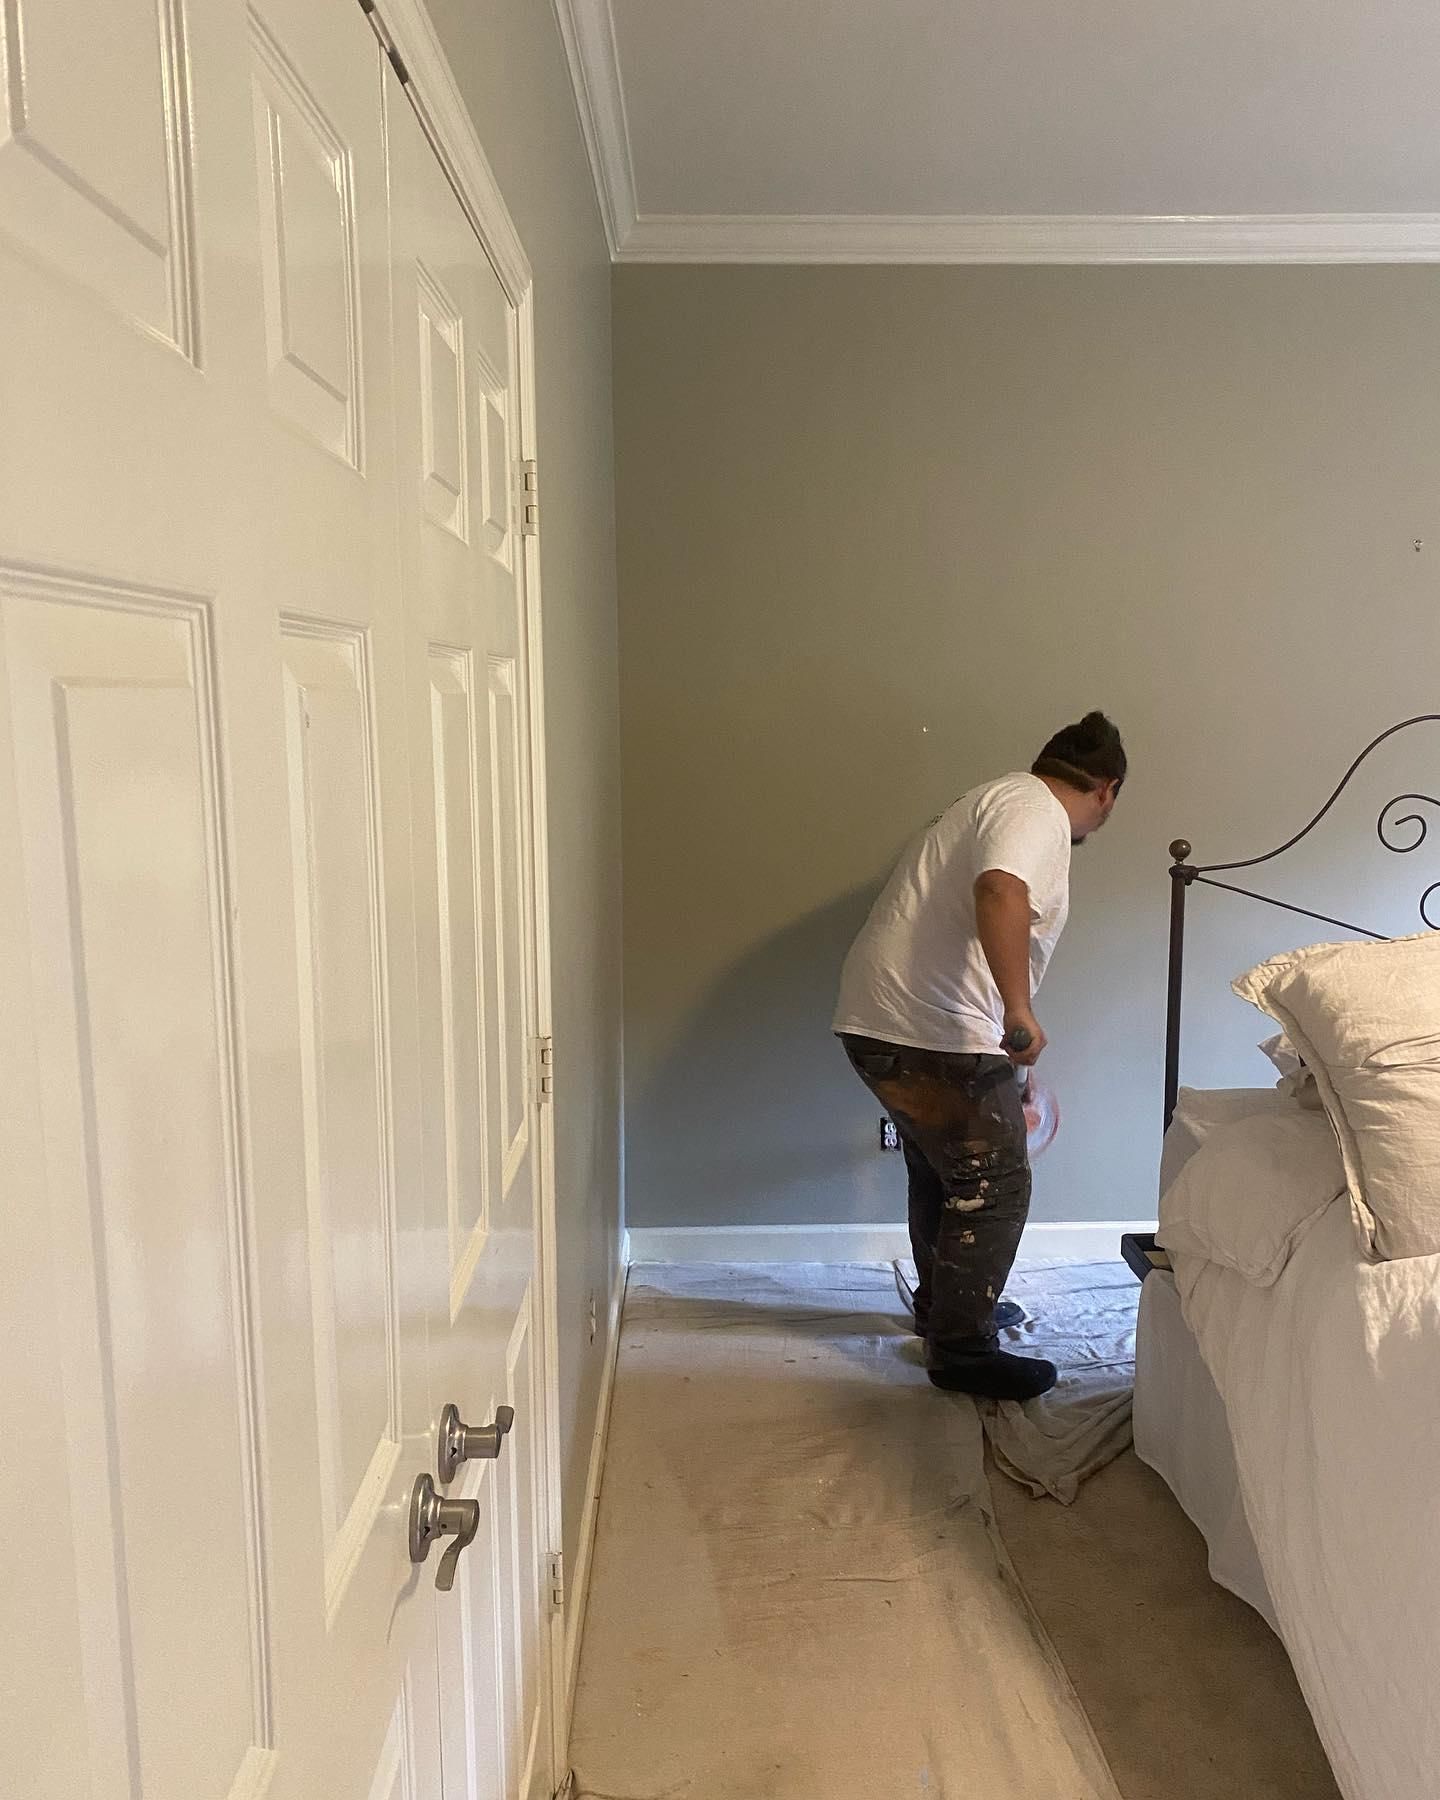  for Luxury Professional Painting in Huntsville, AL